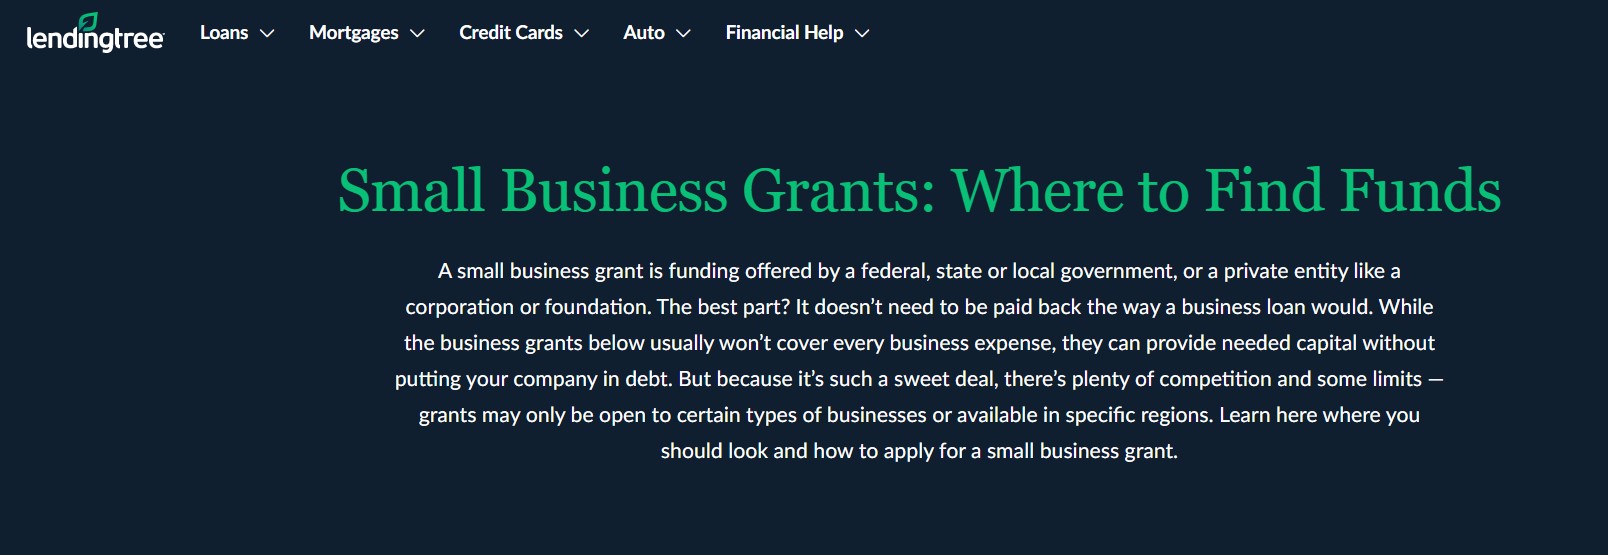 Small Business Grants-08